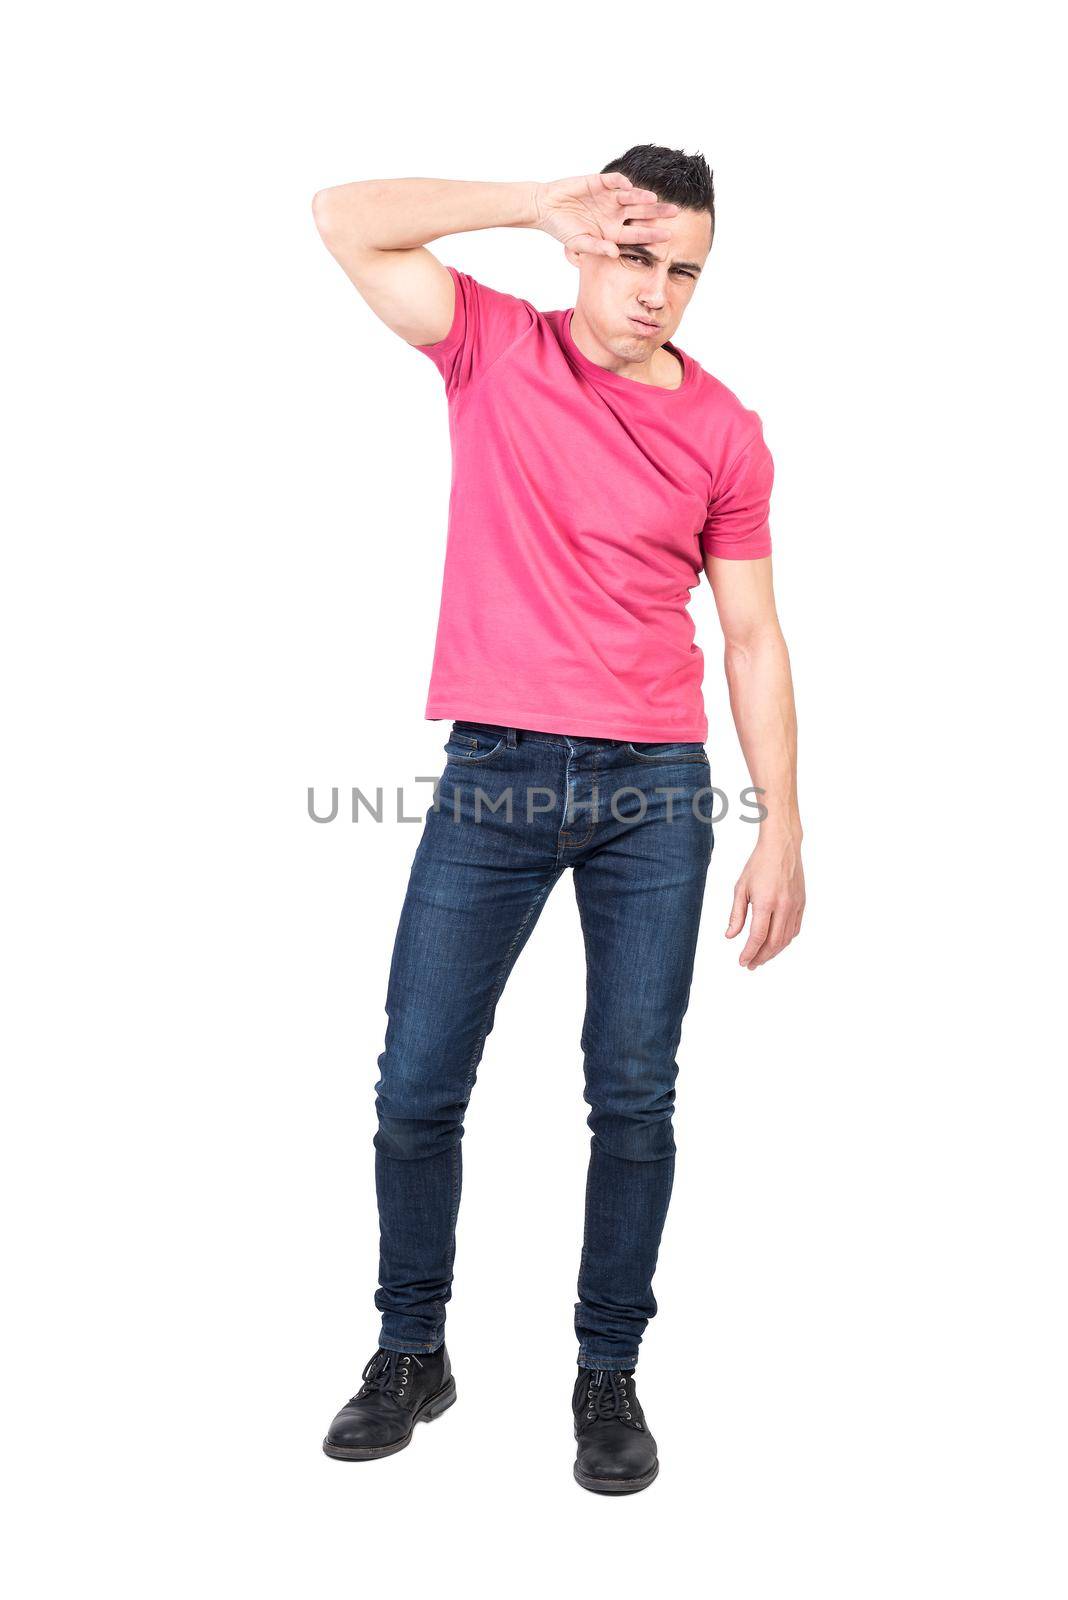 Full length tired male in jeans and pink t shirt touching forehead and looking at camera while suffering from hot weather isolated on white background